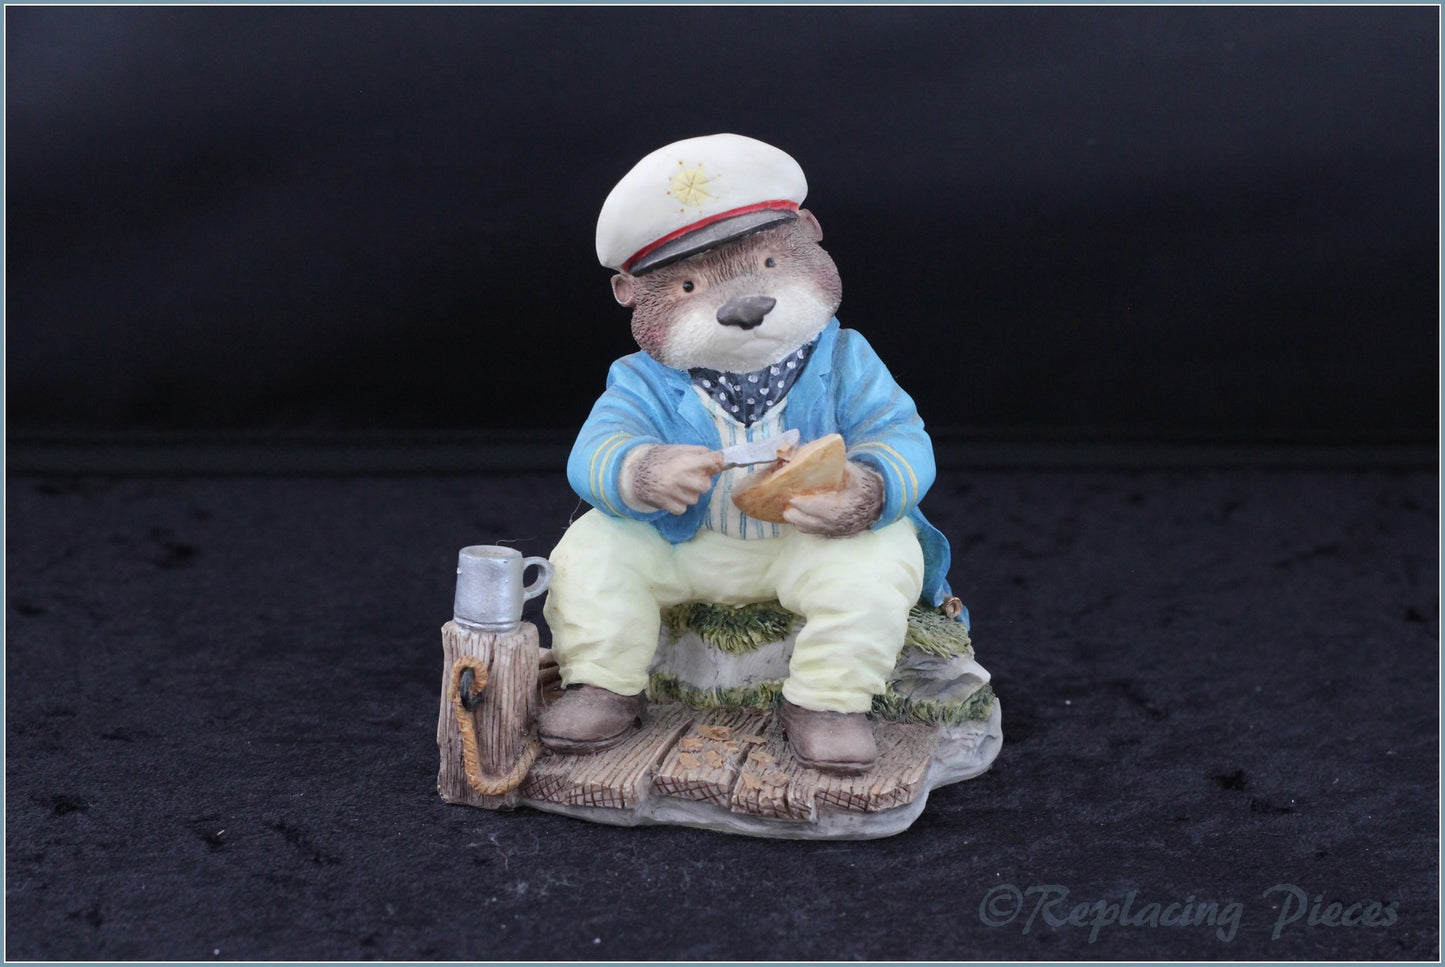 Villeroy & Boch - Foxwood Tales Figurines - No.7 Captain Otter